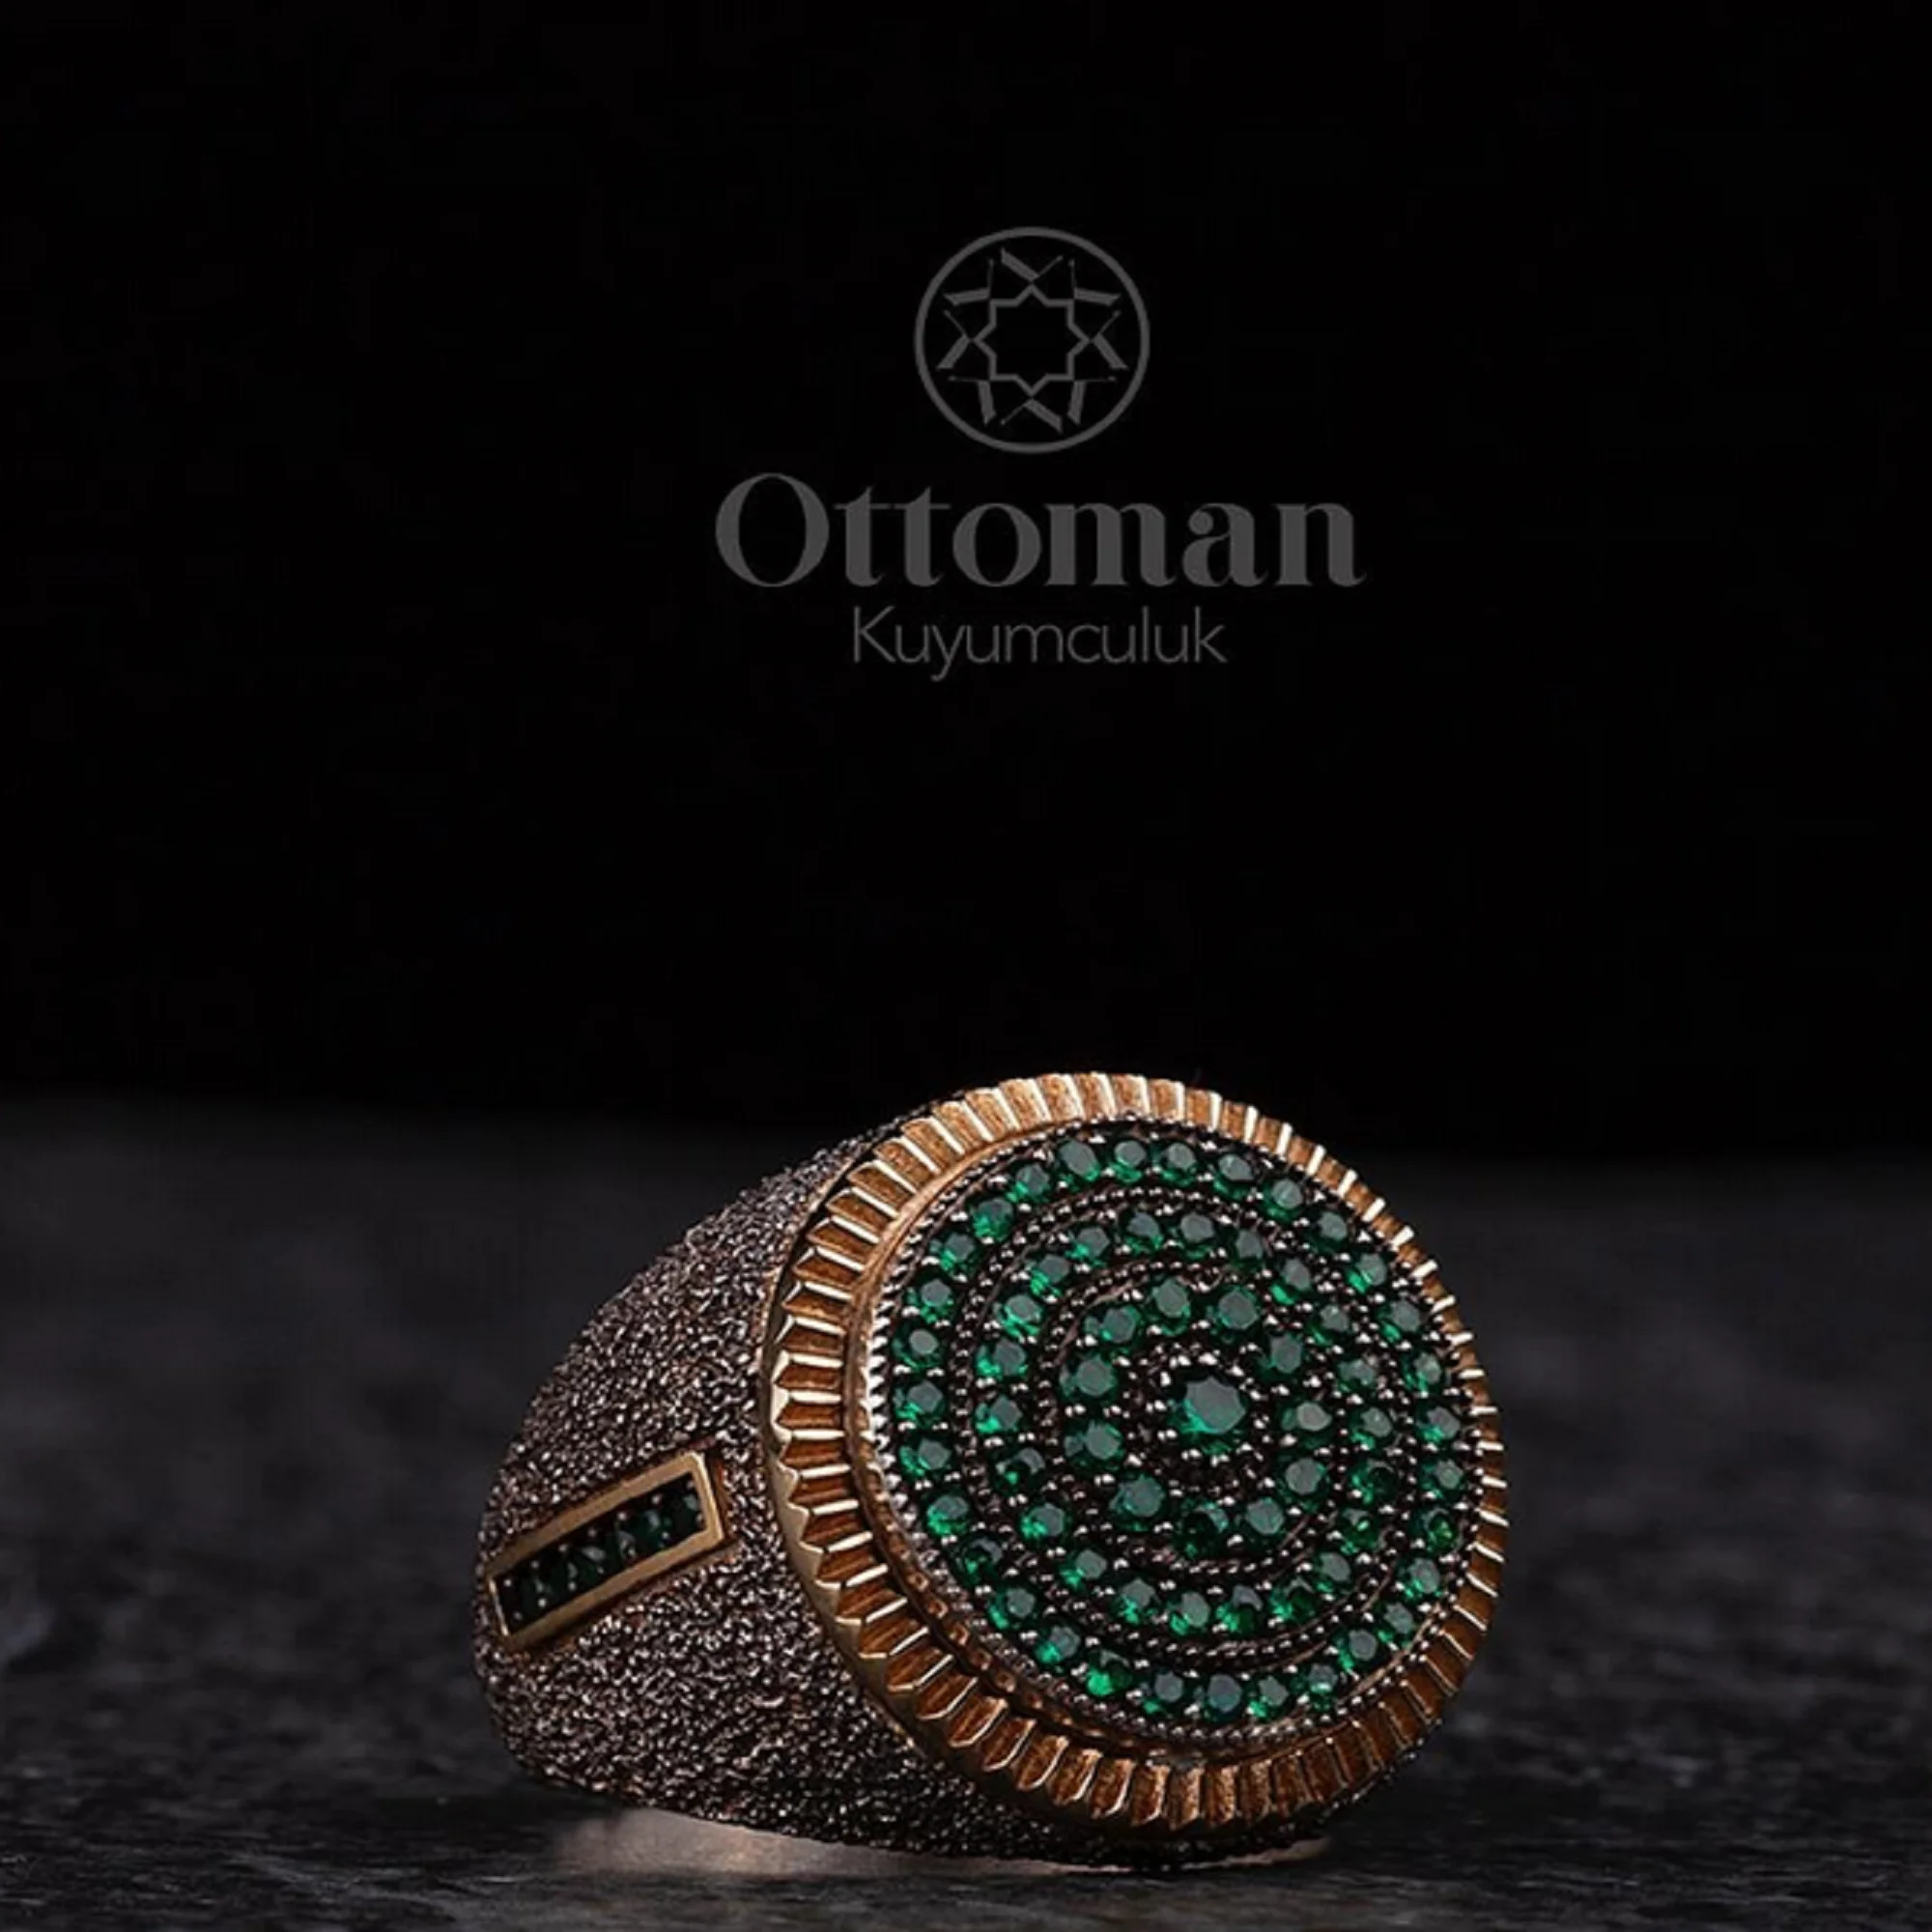 Ottoman Textured Green Our Silver Ring In Our Model With Sandblasting Black Texture Applied It is Decorated With Green Stones